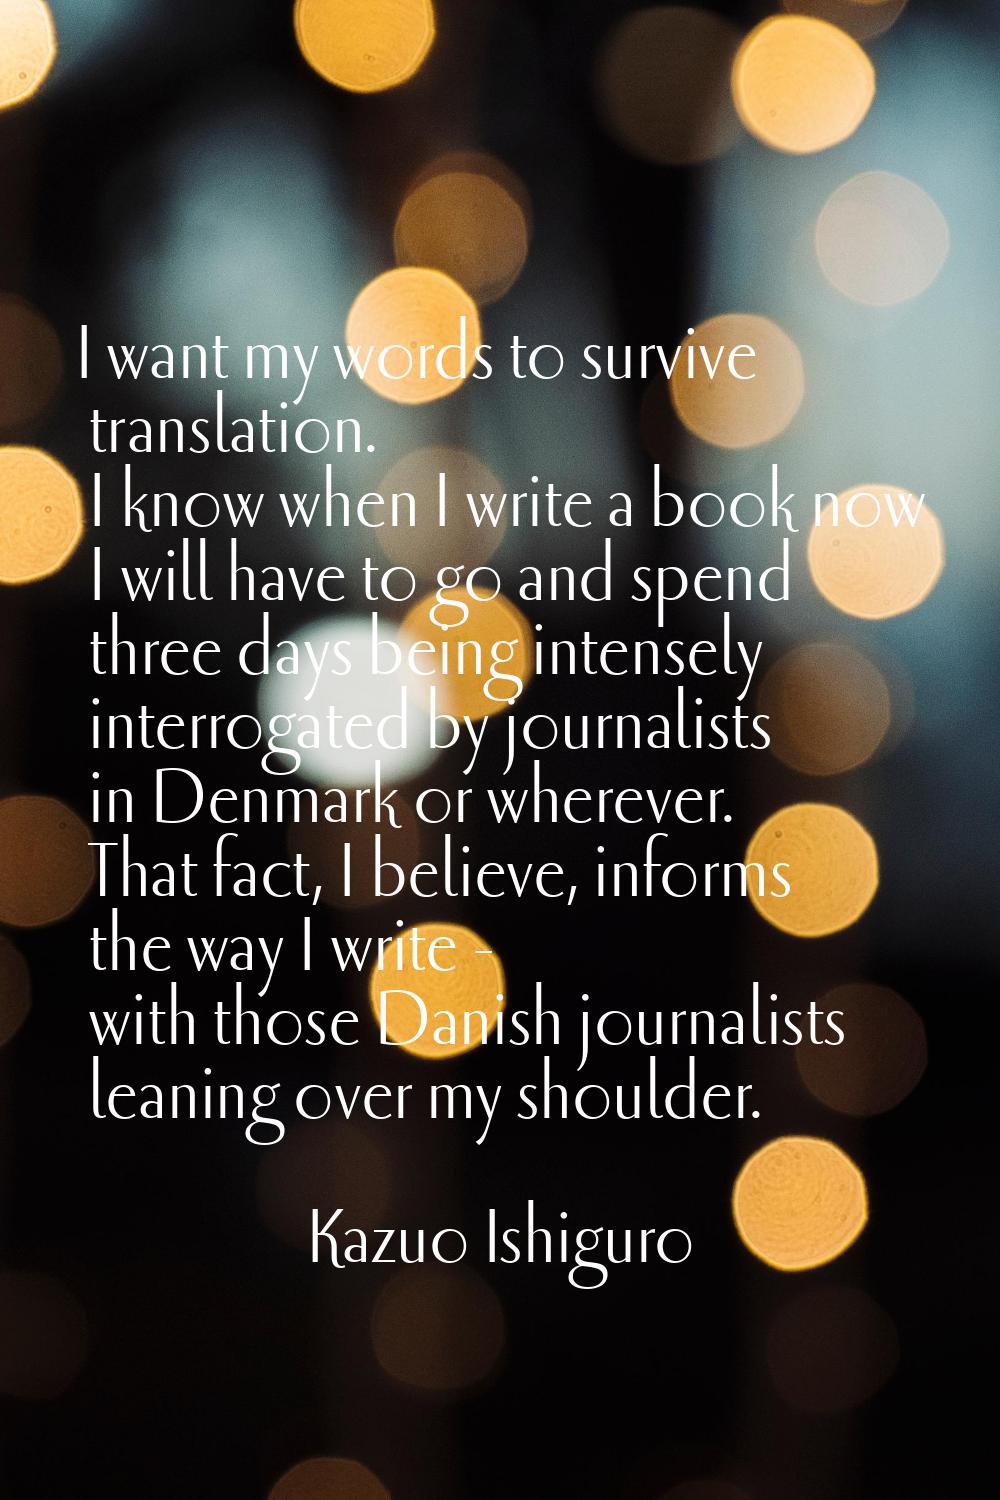 I want my words to survive translation. I know when I write a book now I will have to go and spend 